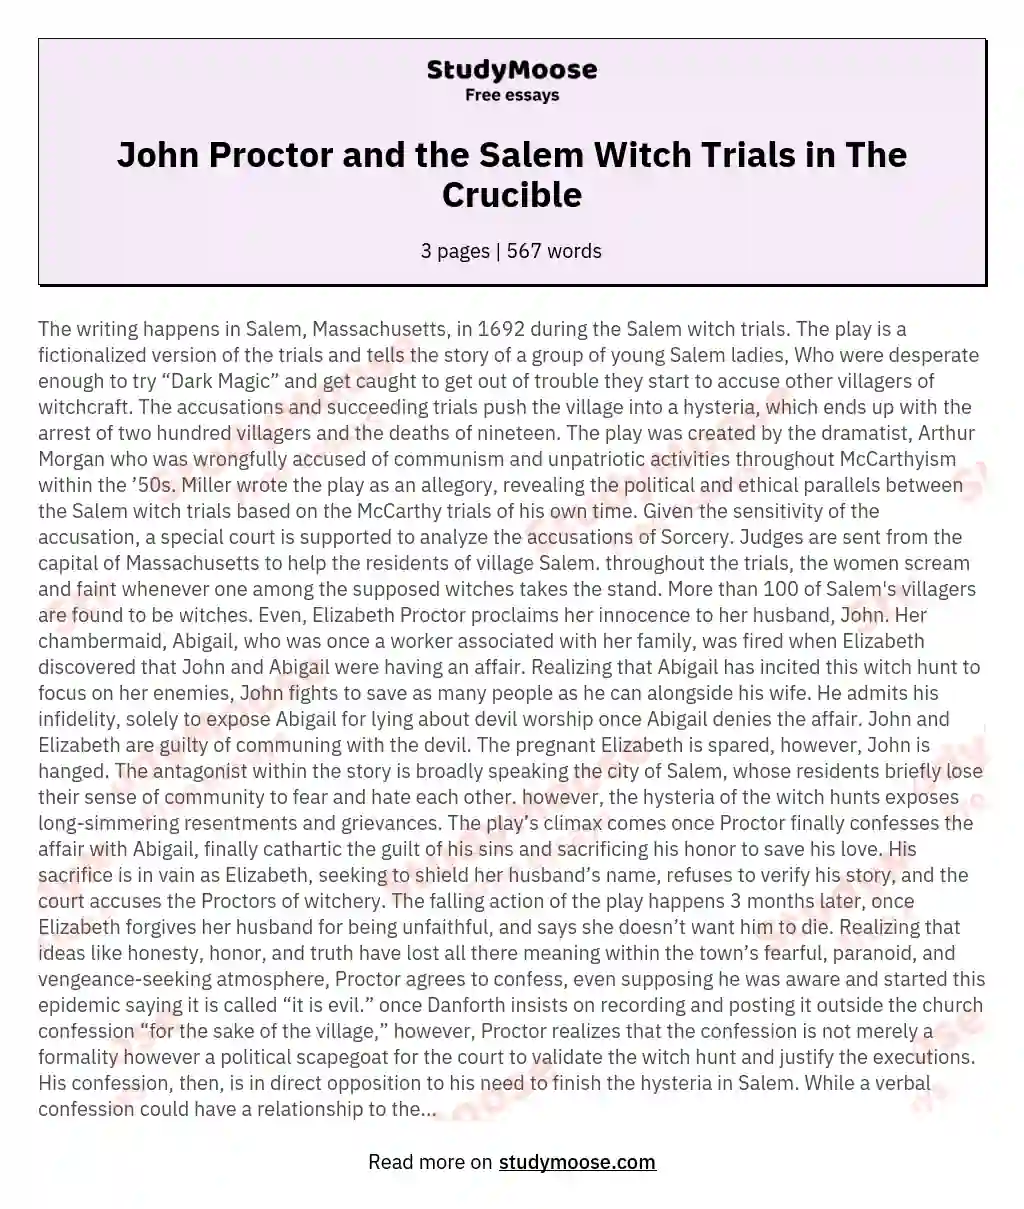 John Proctor and the Salem Witch Trials in The Crucible